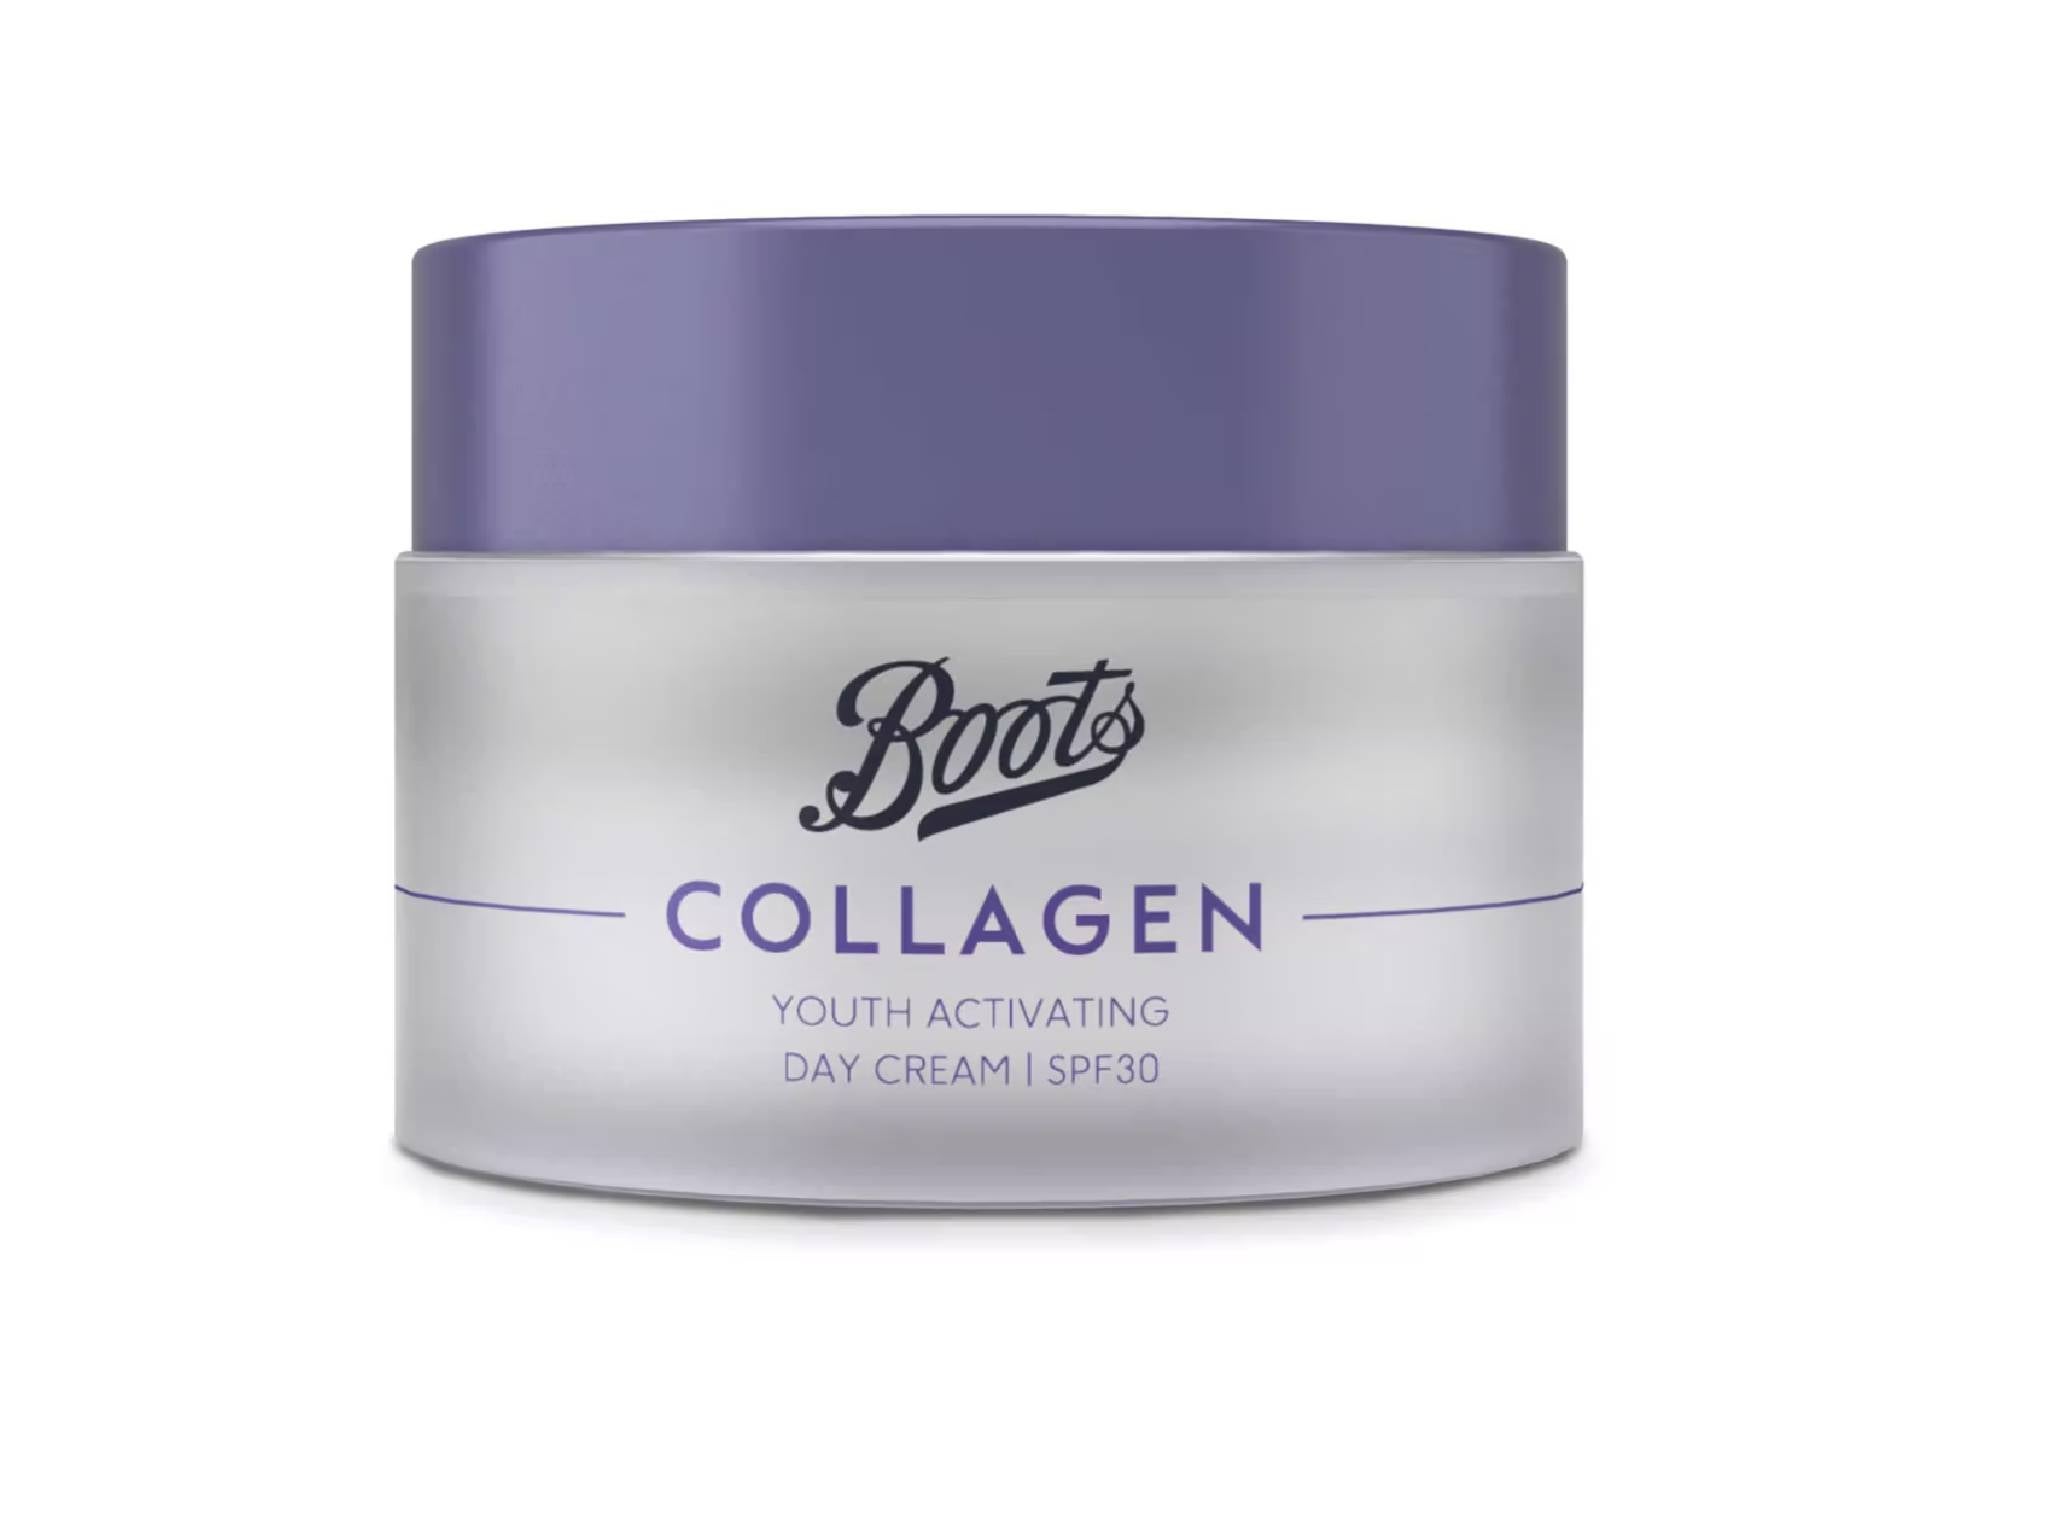 Boots collagen youth activating day cream SPF30